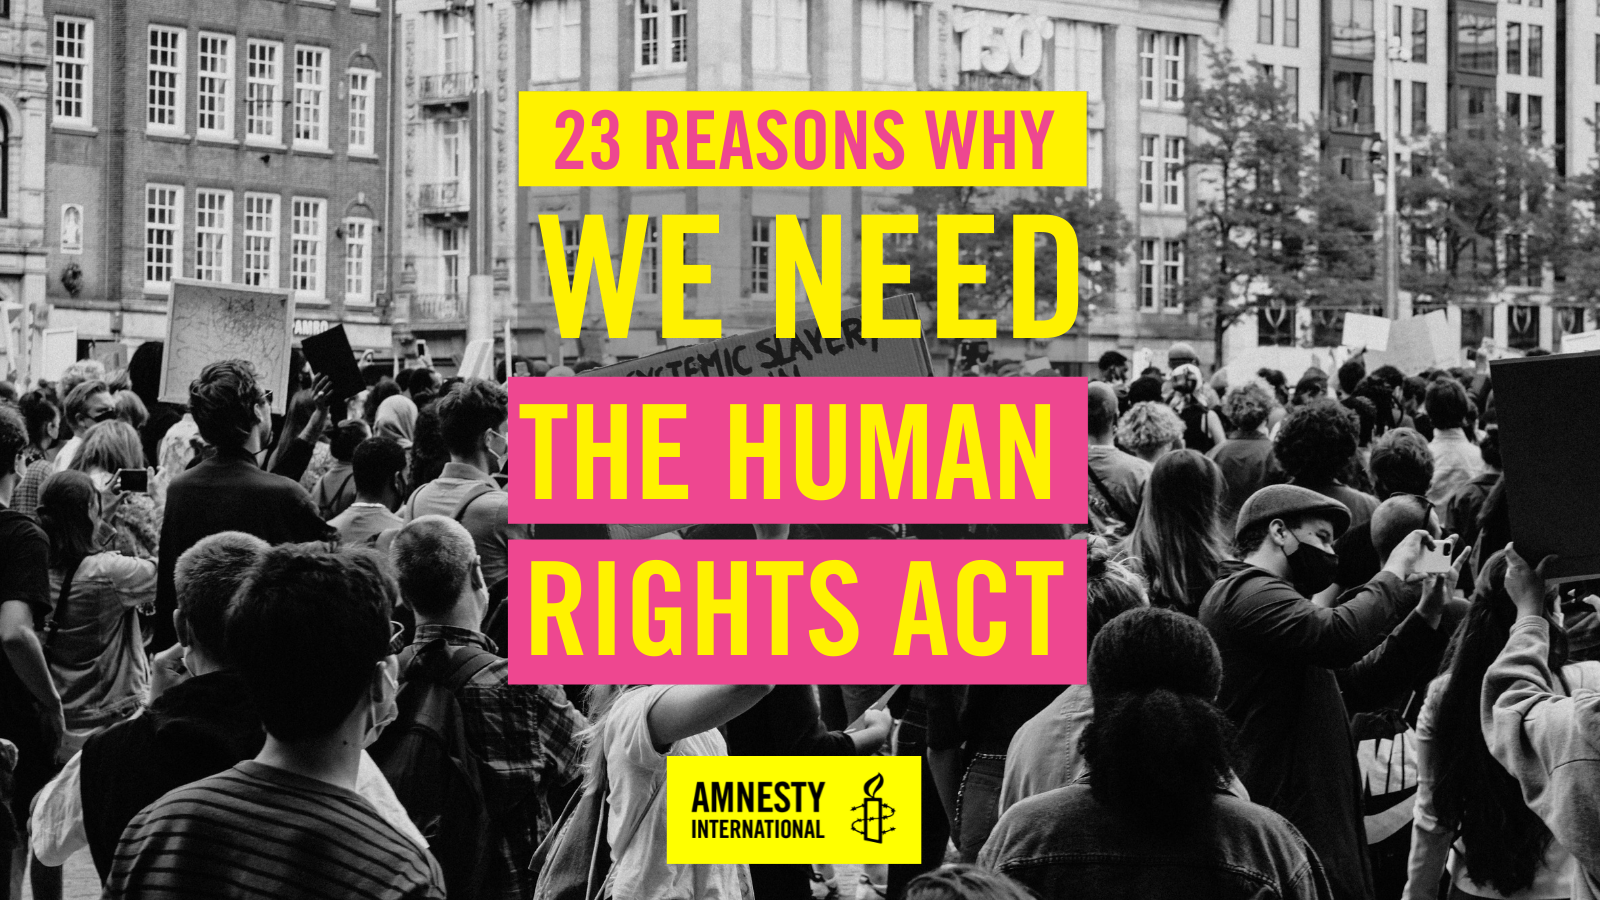 23 reasons why we need the Human Rights Act